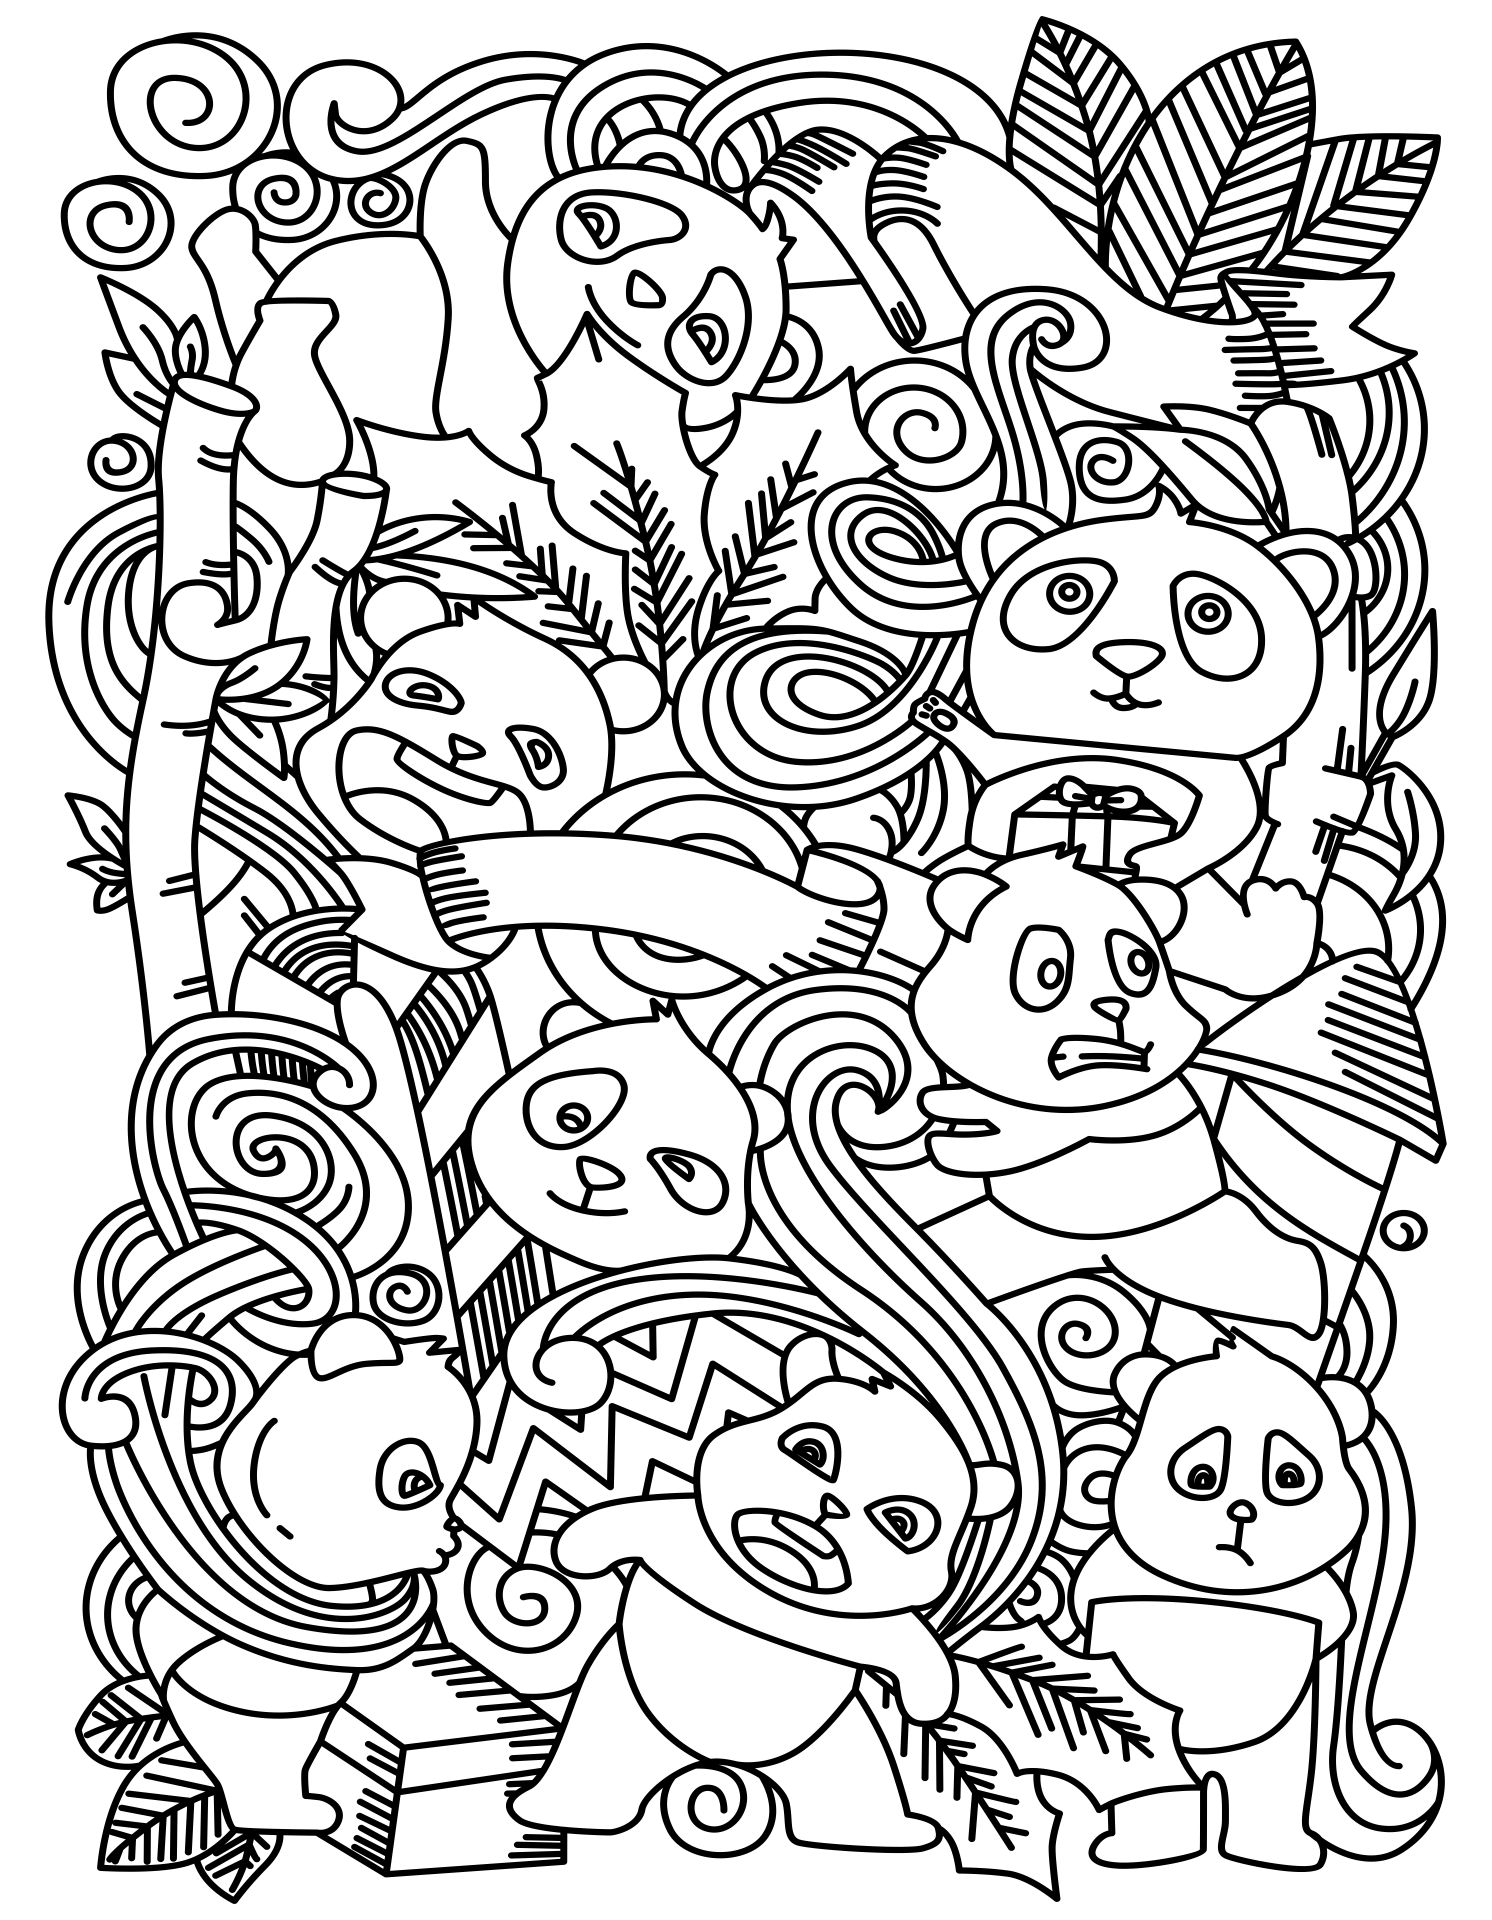 free-difficult-coloring-pages-for-adults